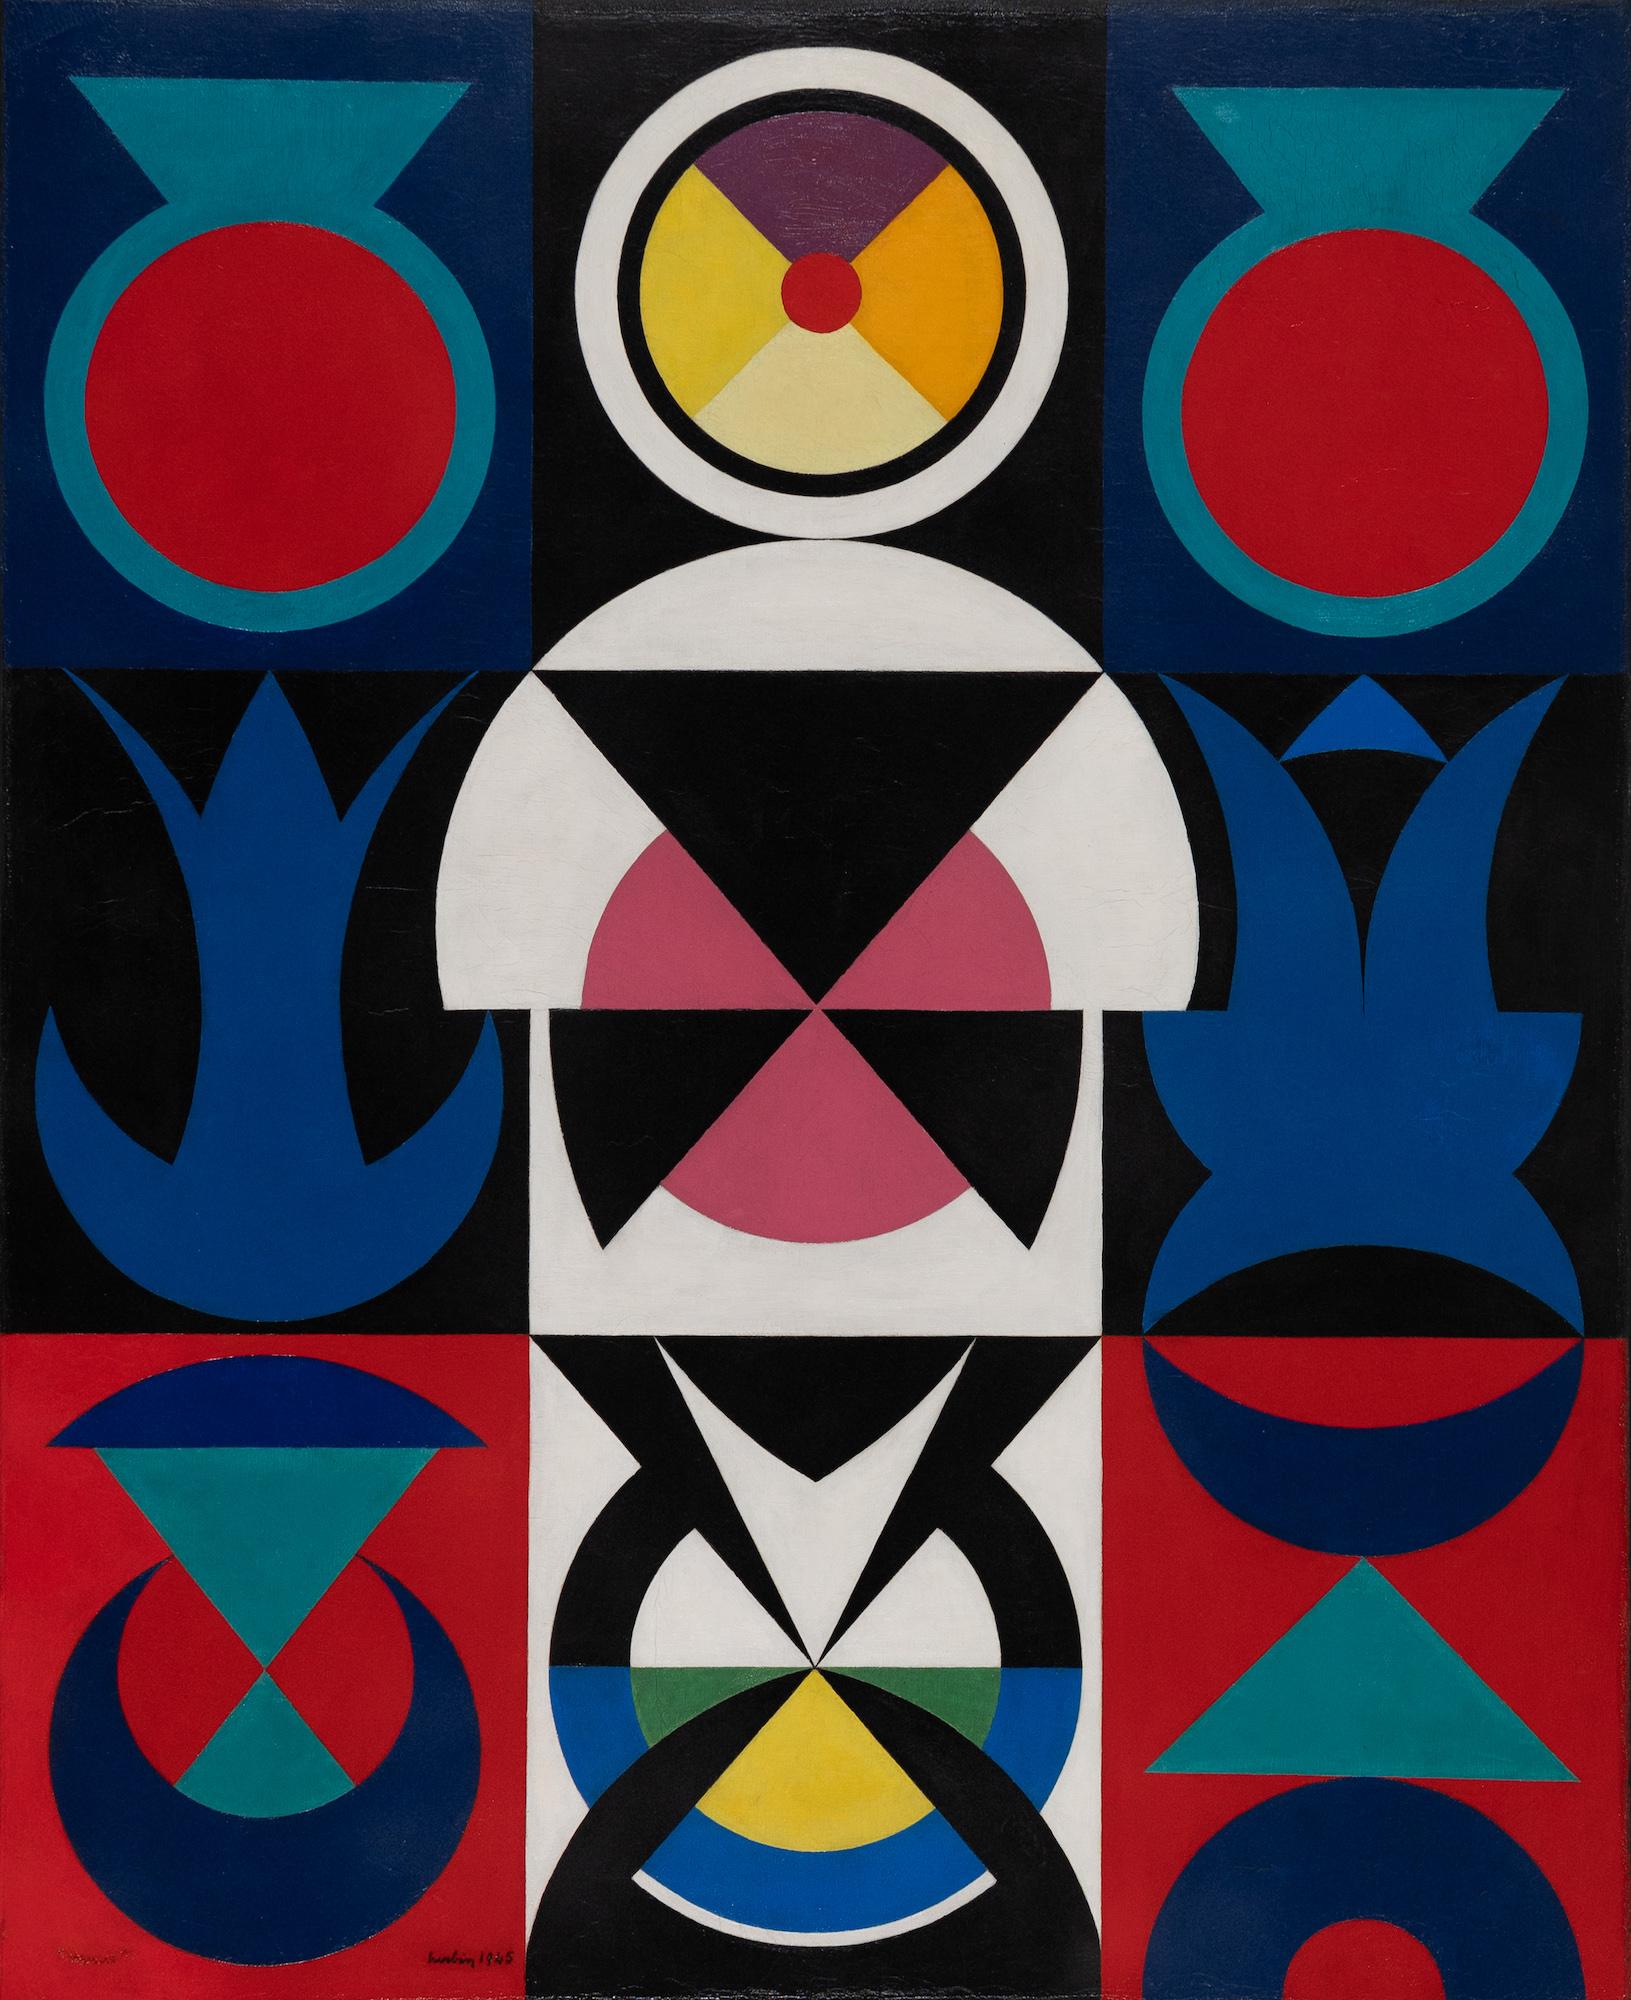 VENUS I by Auguste Herbin (1882-1960)
Oil on canvas
100 x 81 cm (39 ³/₈ x 31 ⁷/₈ inches)
Signed and dated lower left, herbin 1945

Provenance: Private collection, Stockholm
Galerie des Etats-Unis, S.Stoliar, Cannes
Sotheby's London, 2002
Dorval